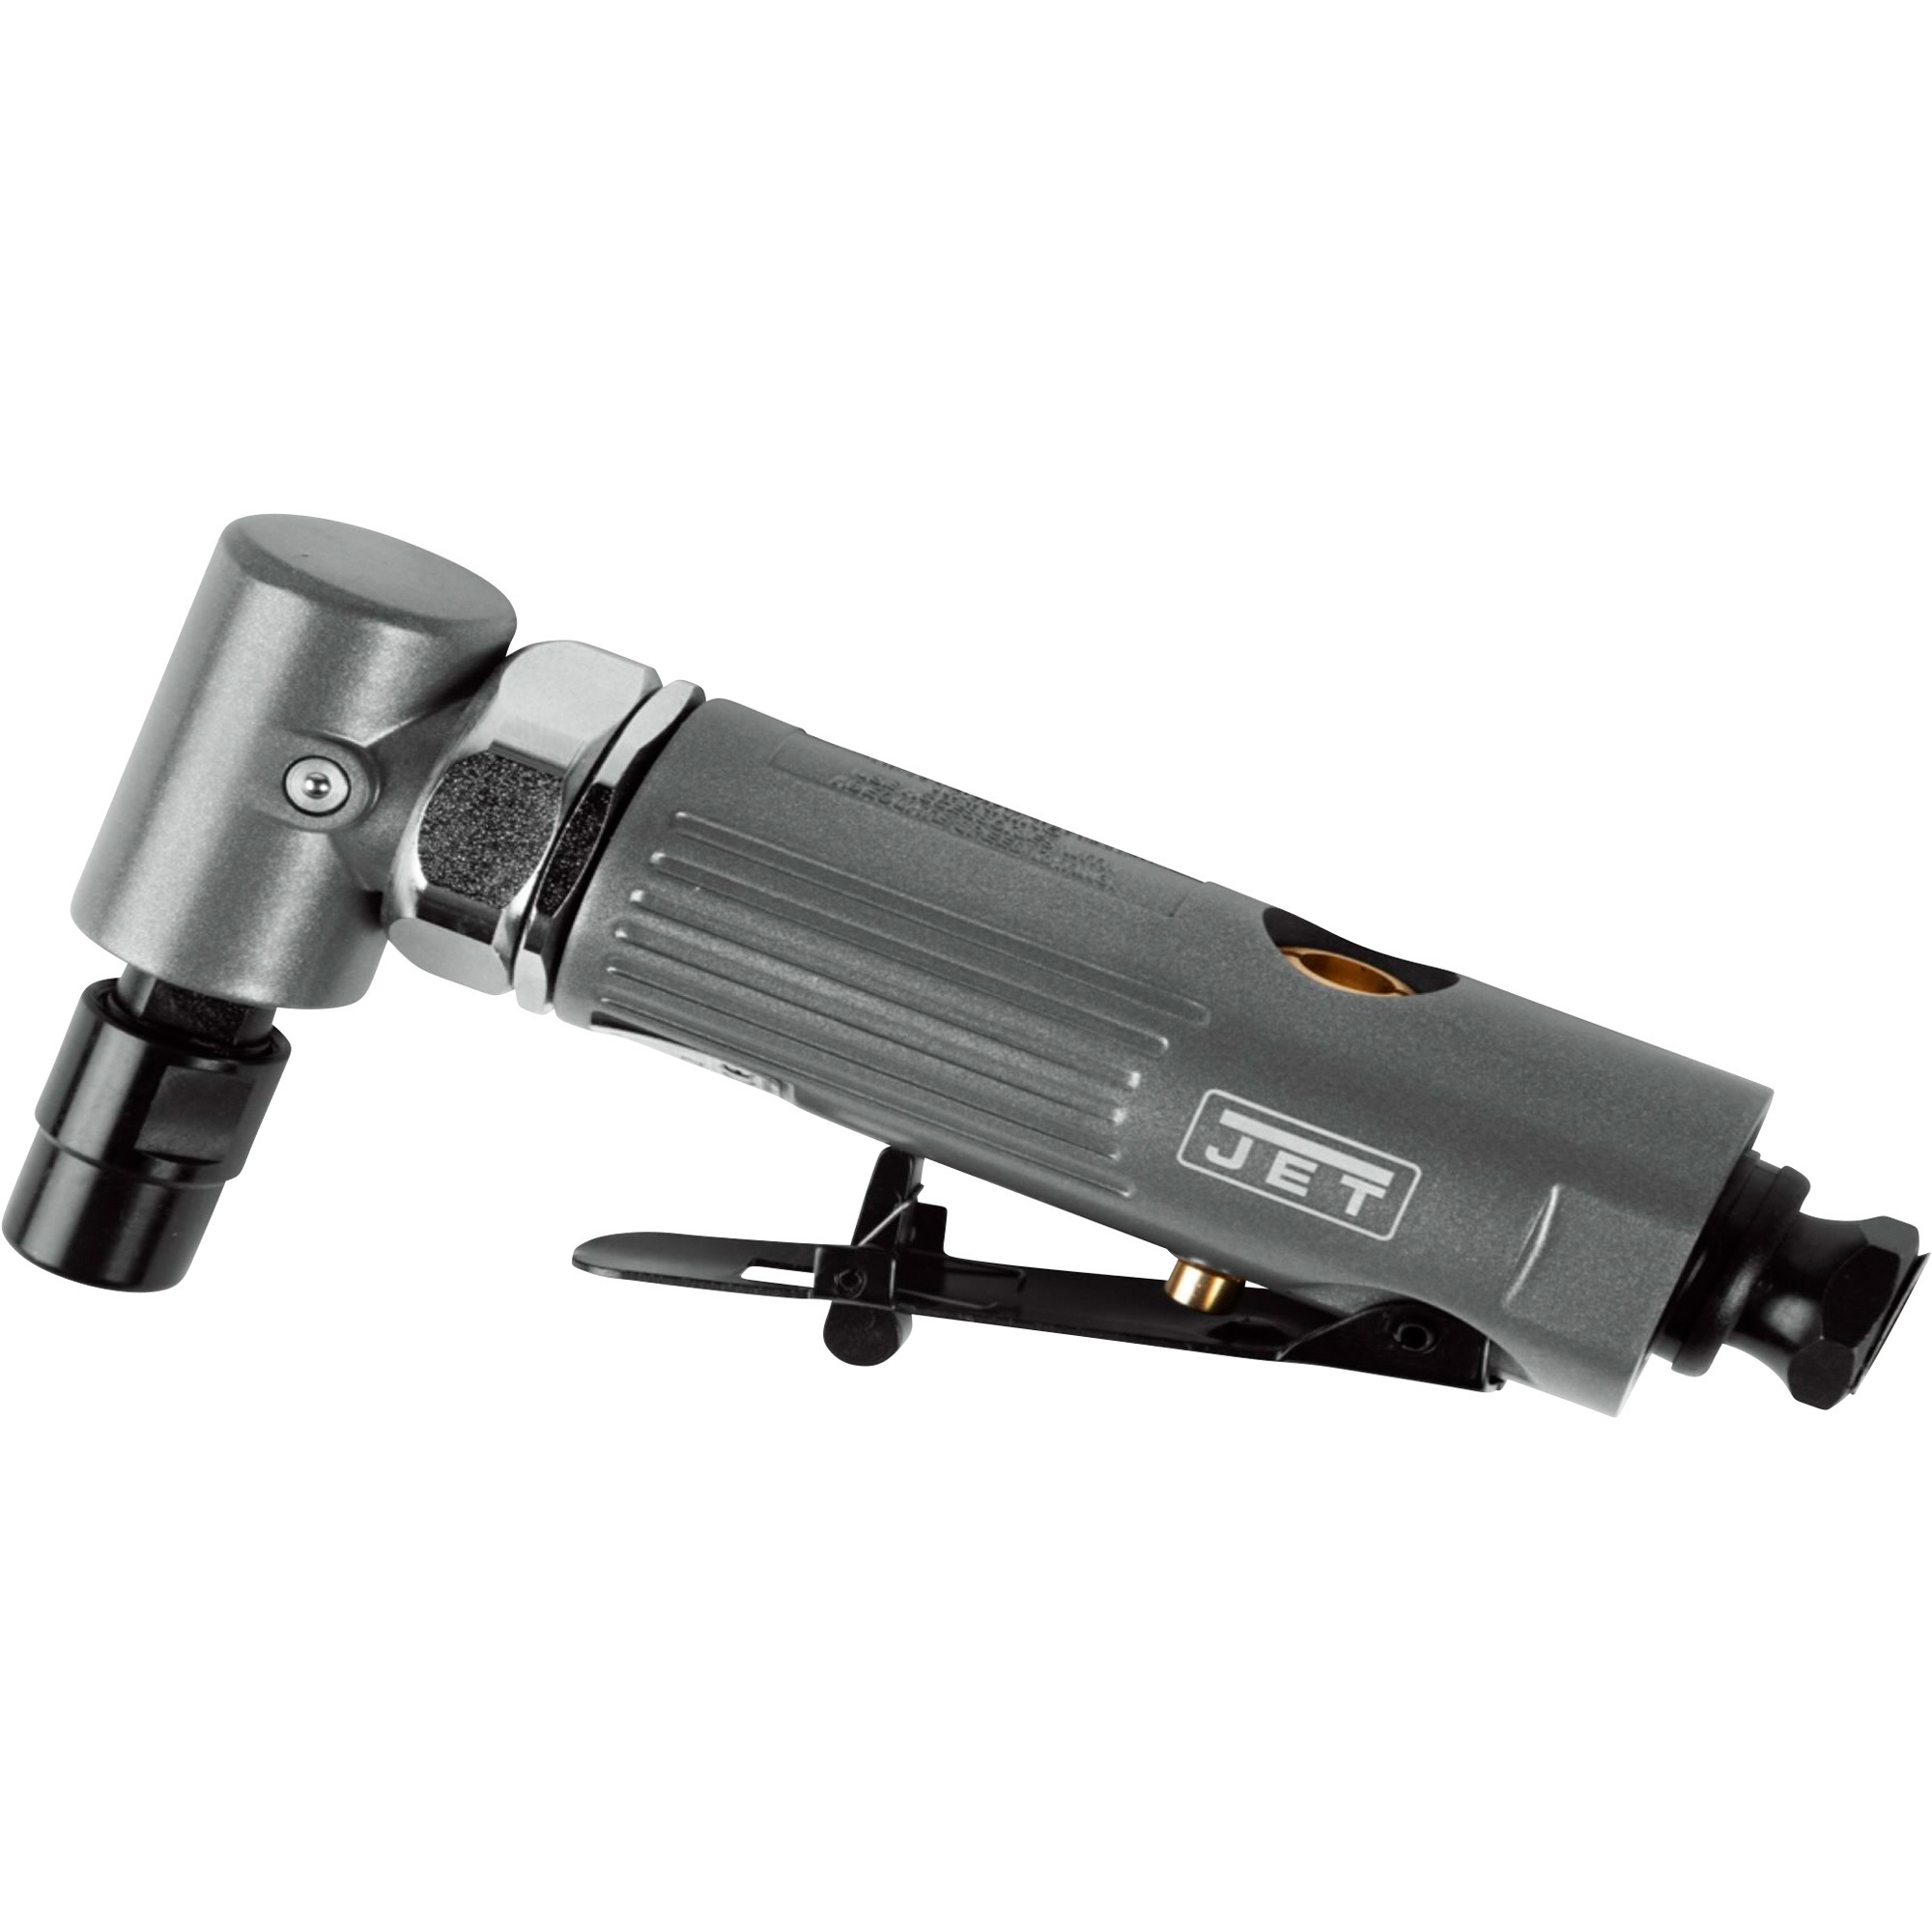 JET Right Angle Air Die Grinder, 1/4Inch, 22,000 RPM, Model JAT-403